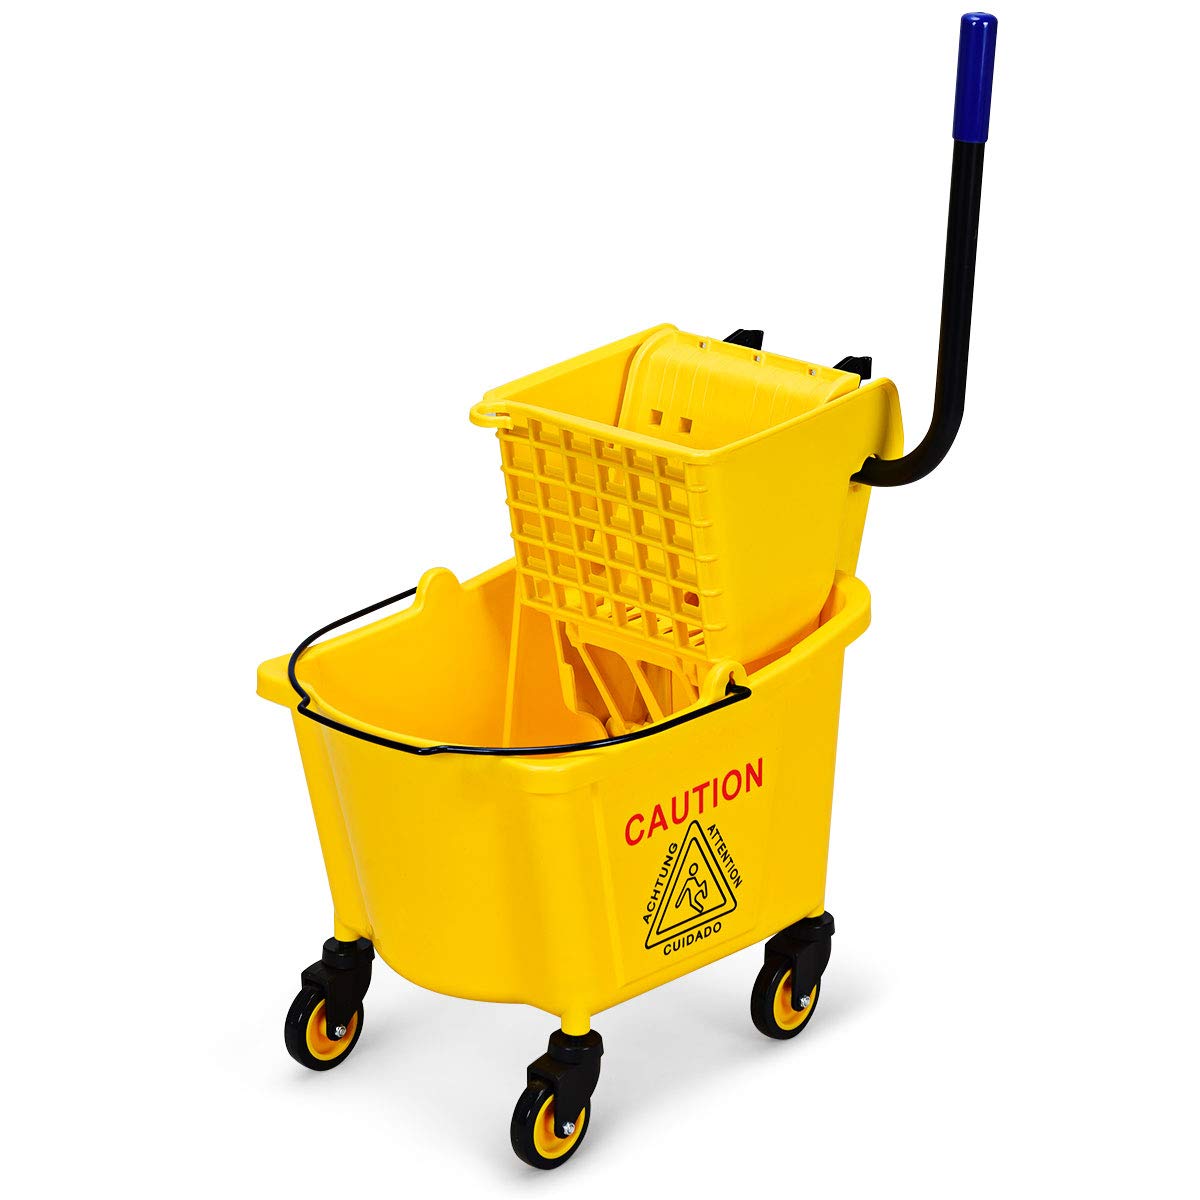 Commercial Mop Bucket with Wringer, Household Portable Mop Bucket - GoplusUS